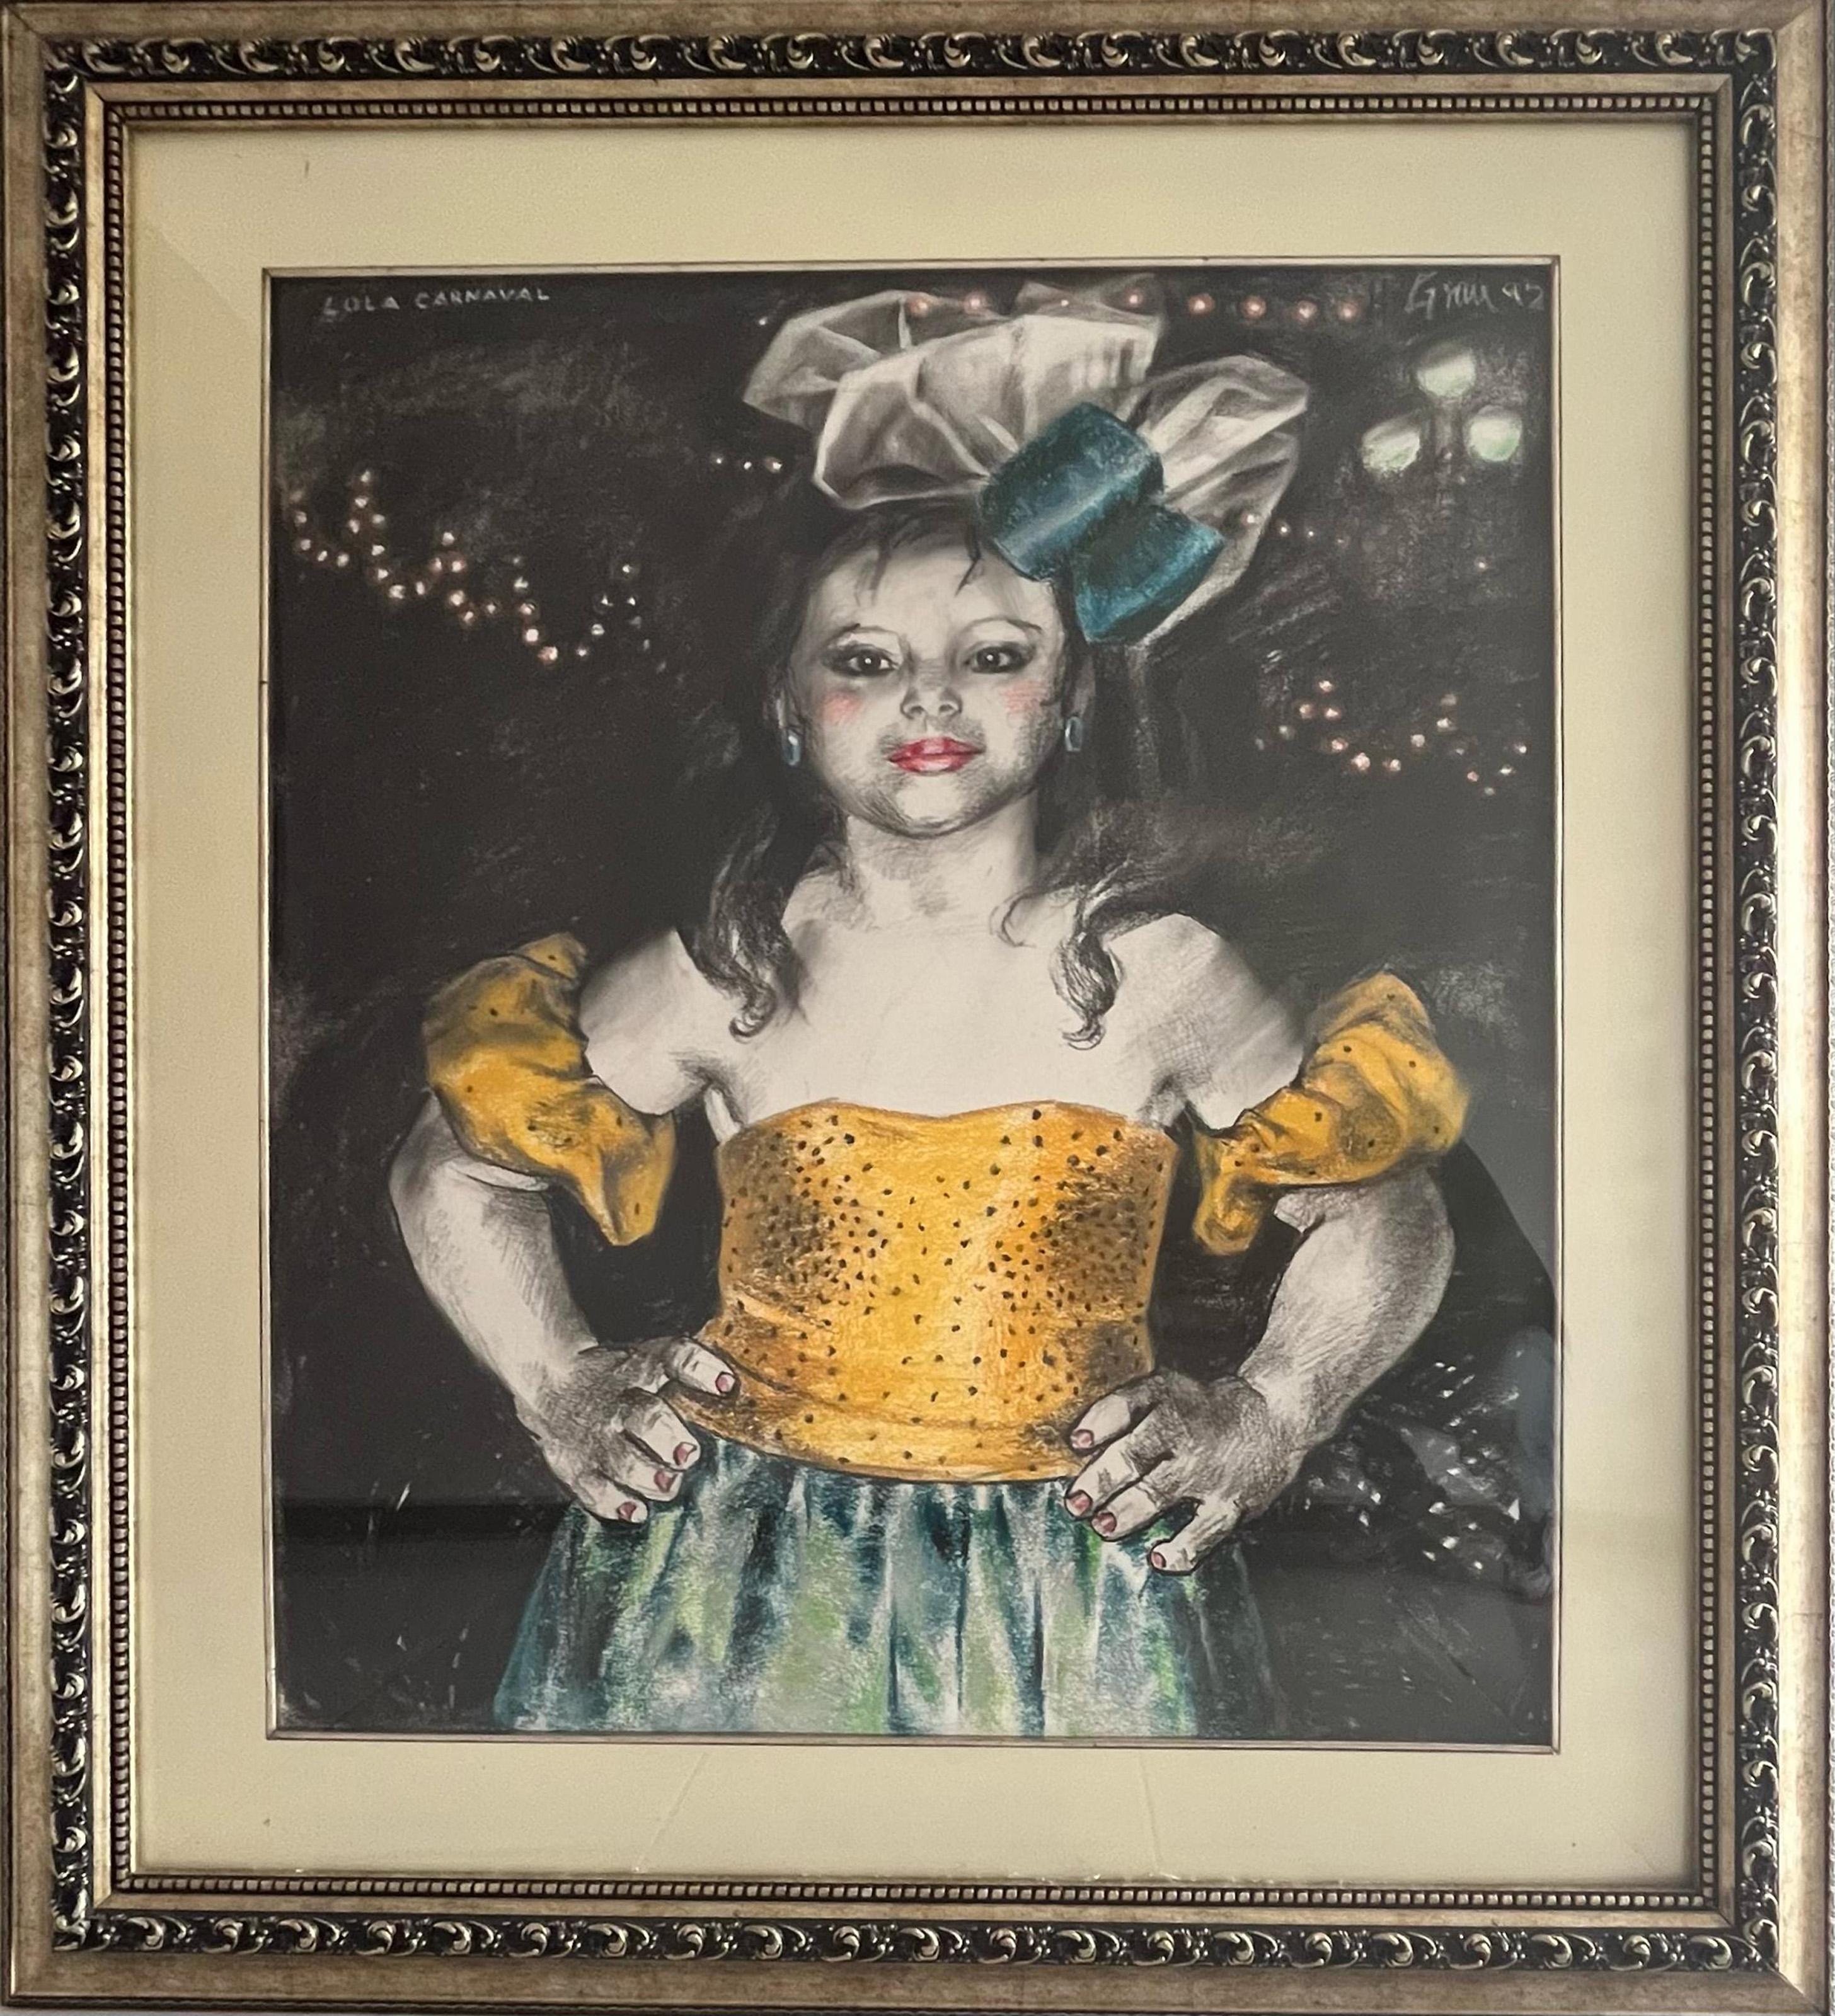 Lola Carnaval, Charcoal and Pastel on Paper by Enrique Grau